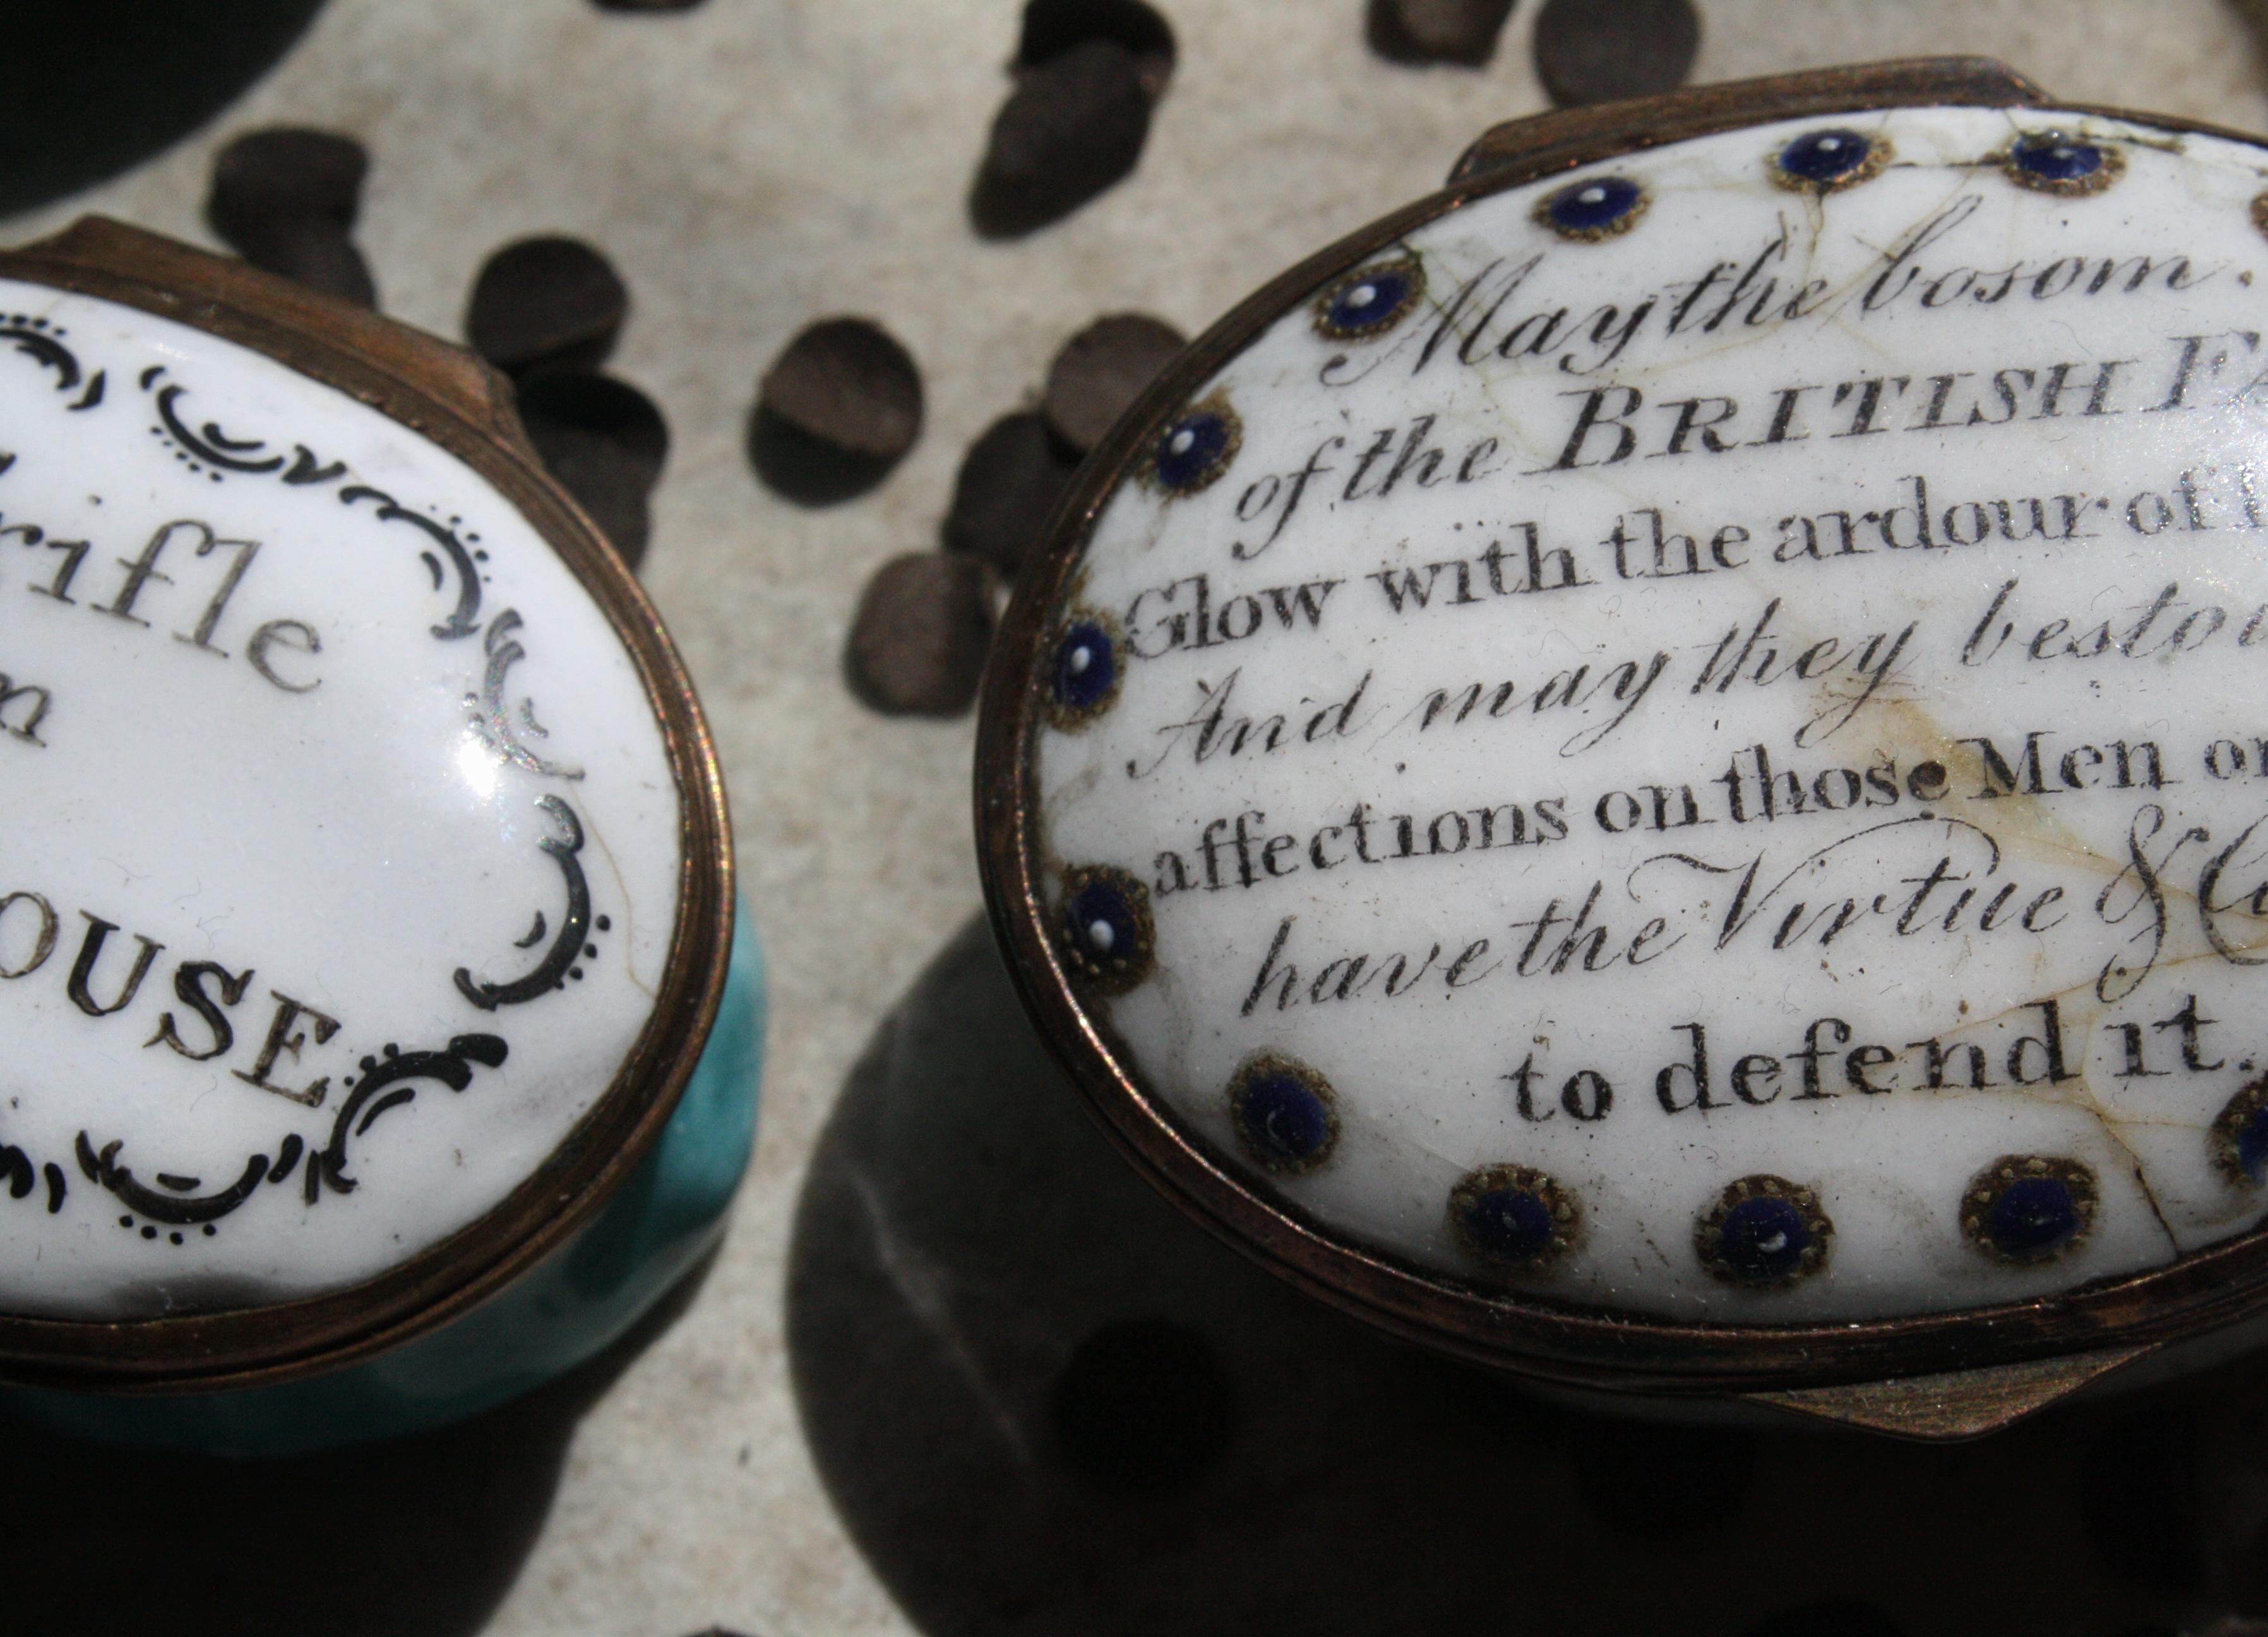 A large and decorative collection of enamel patch boxes with motifs, rhymes and riddles. 

These small enamel souvenir where purchased from highly fashionable city and towns in the late 18th century, purchased as gifts and tokens to lovers. All